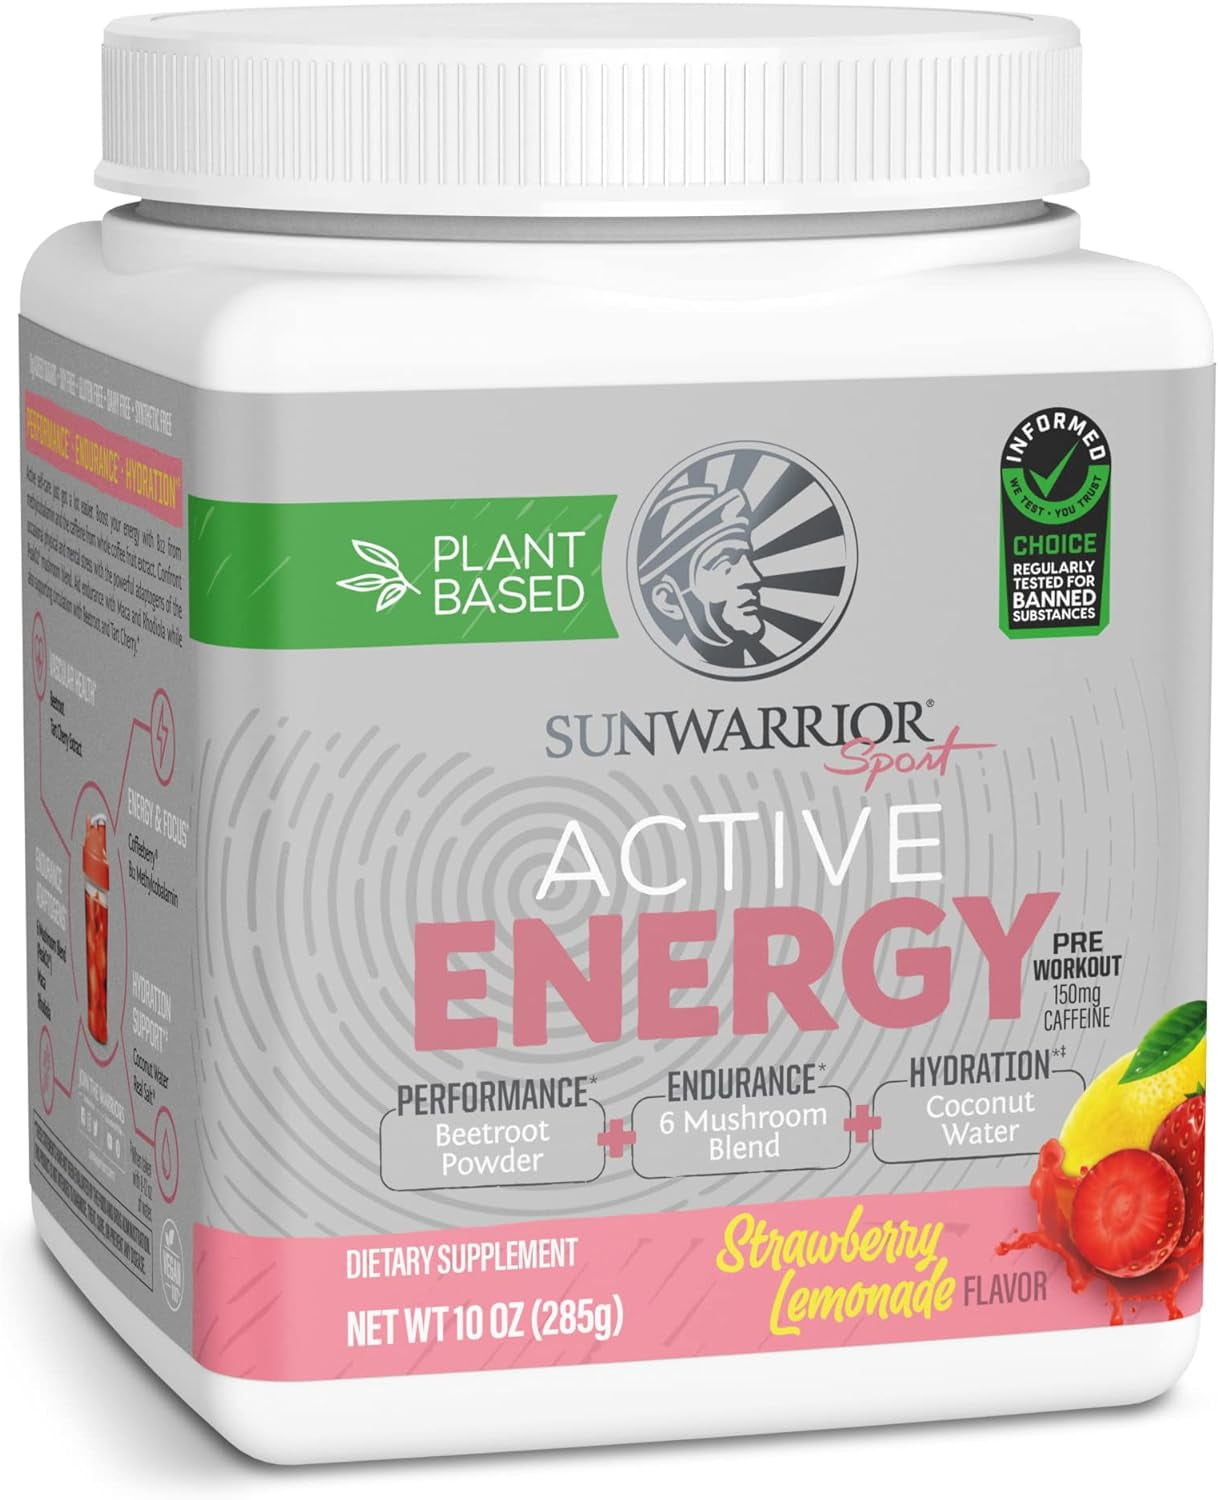 Sunwarrior Plant-Based Preworkout Powder Hydration Blend | Soy Free Sugar Free Gluten Free Dairy Free Synthetic Free | Strawberry Lemonade 30 Servings | Sport Active Energy